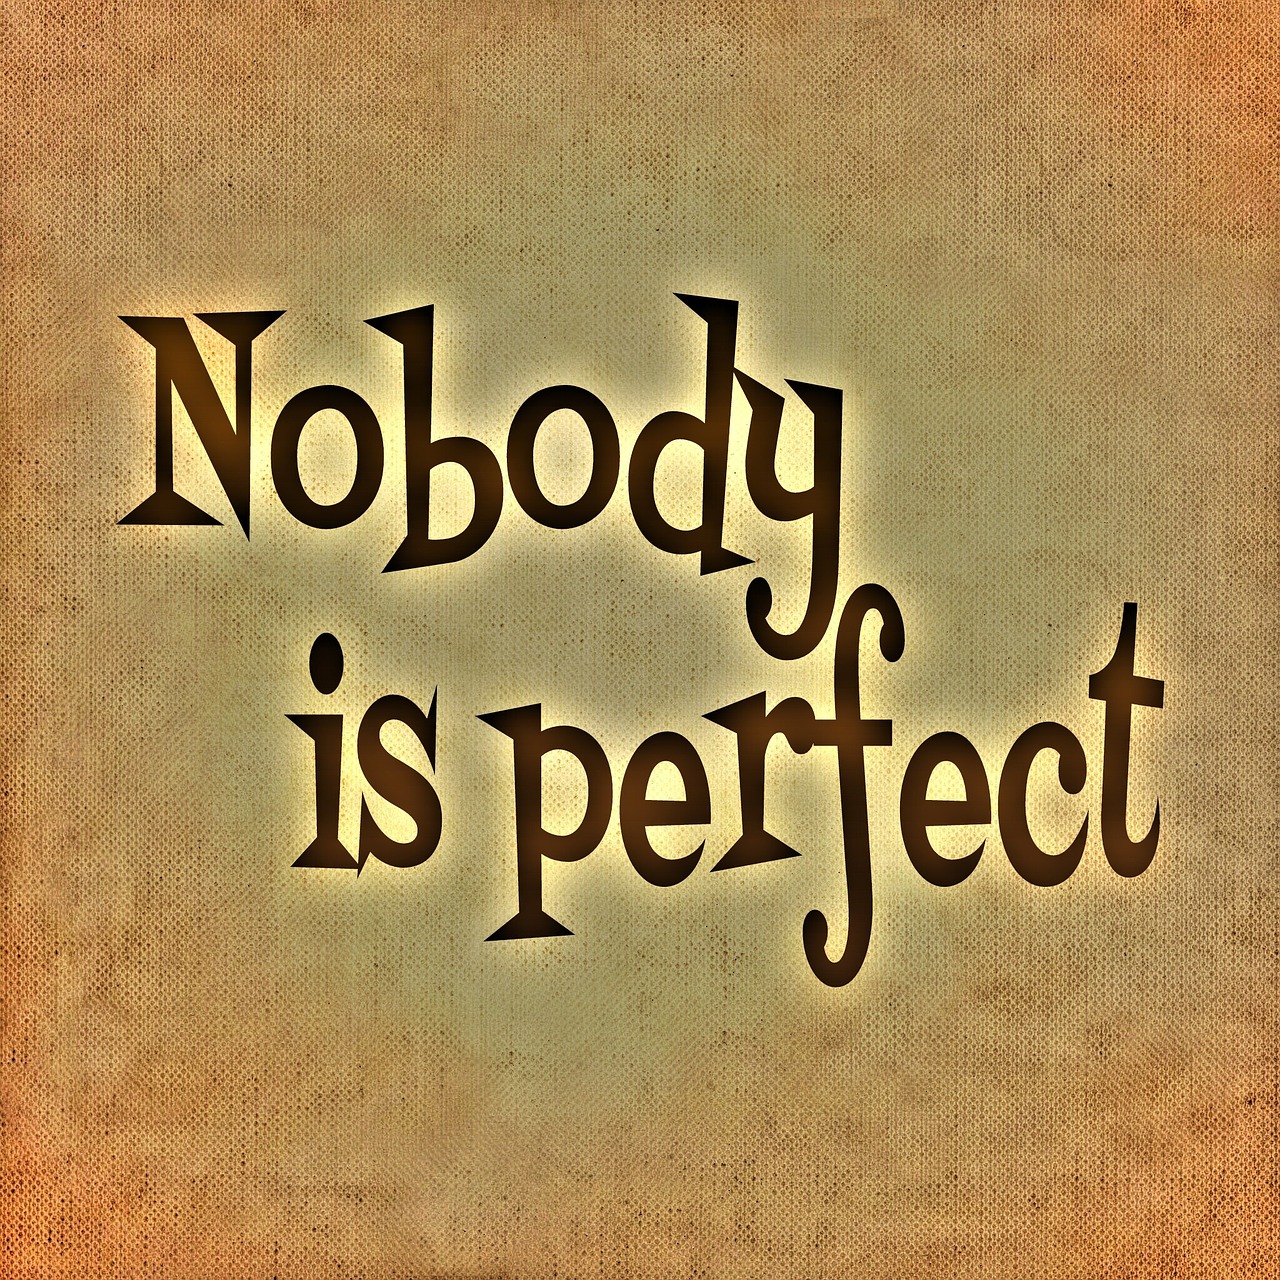 nobody is perfect saying perfect free photo